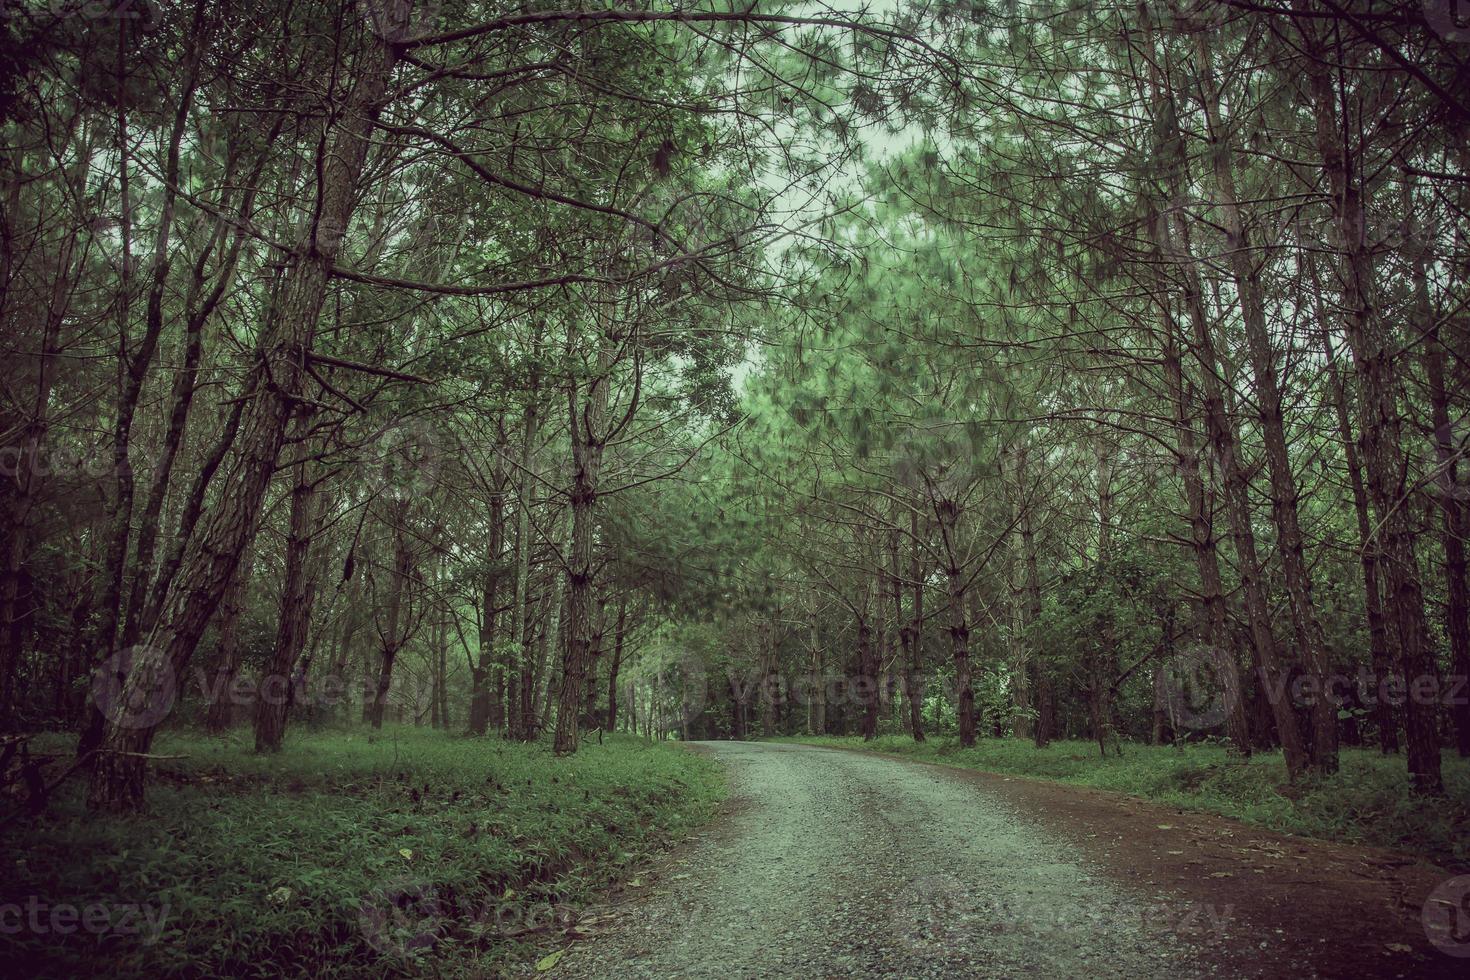 Road in the  Pine forest photo